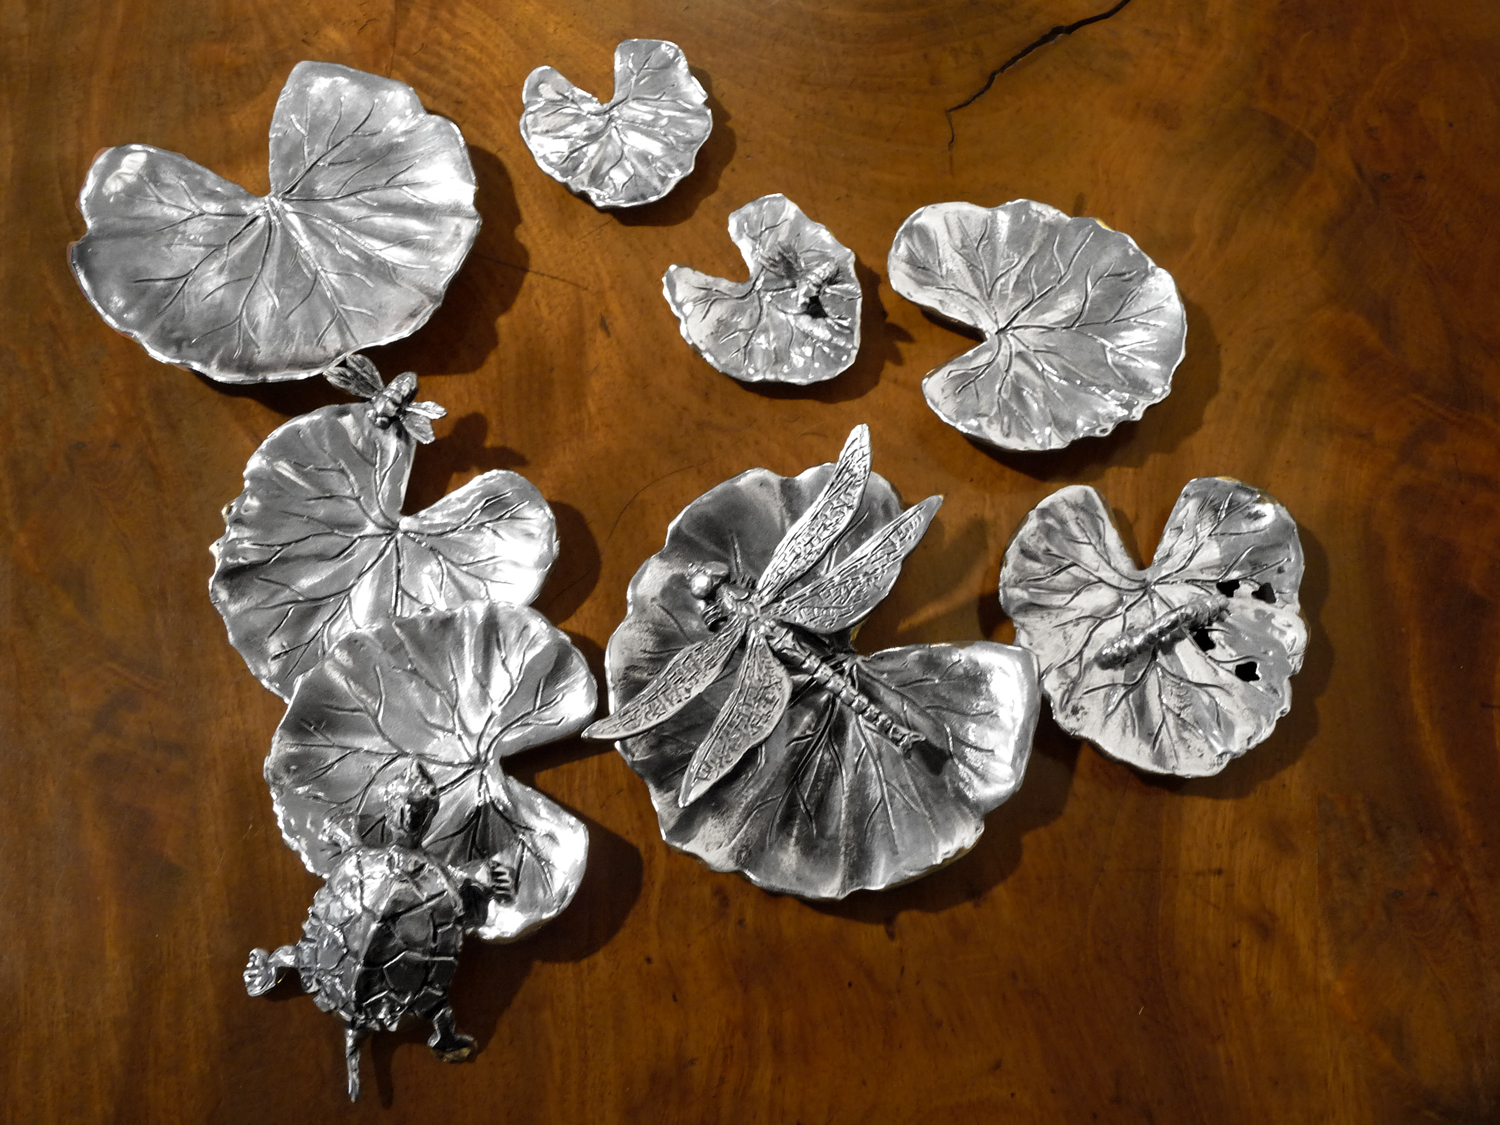 Lily Pad Assortment  by Charles H. Reinike III